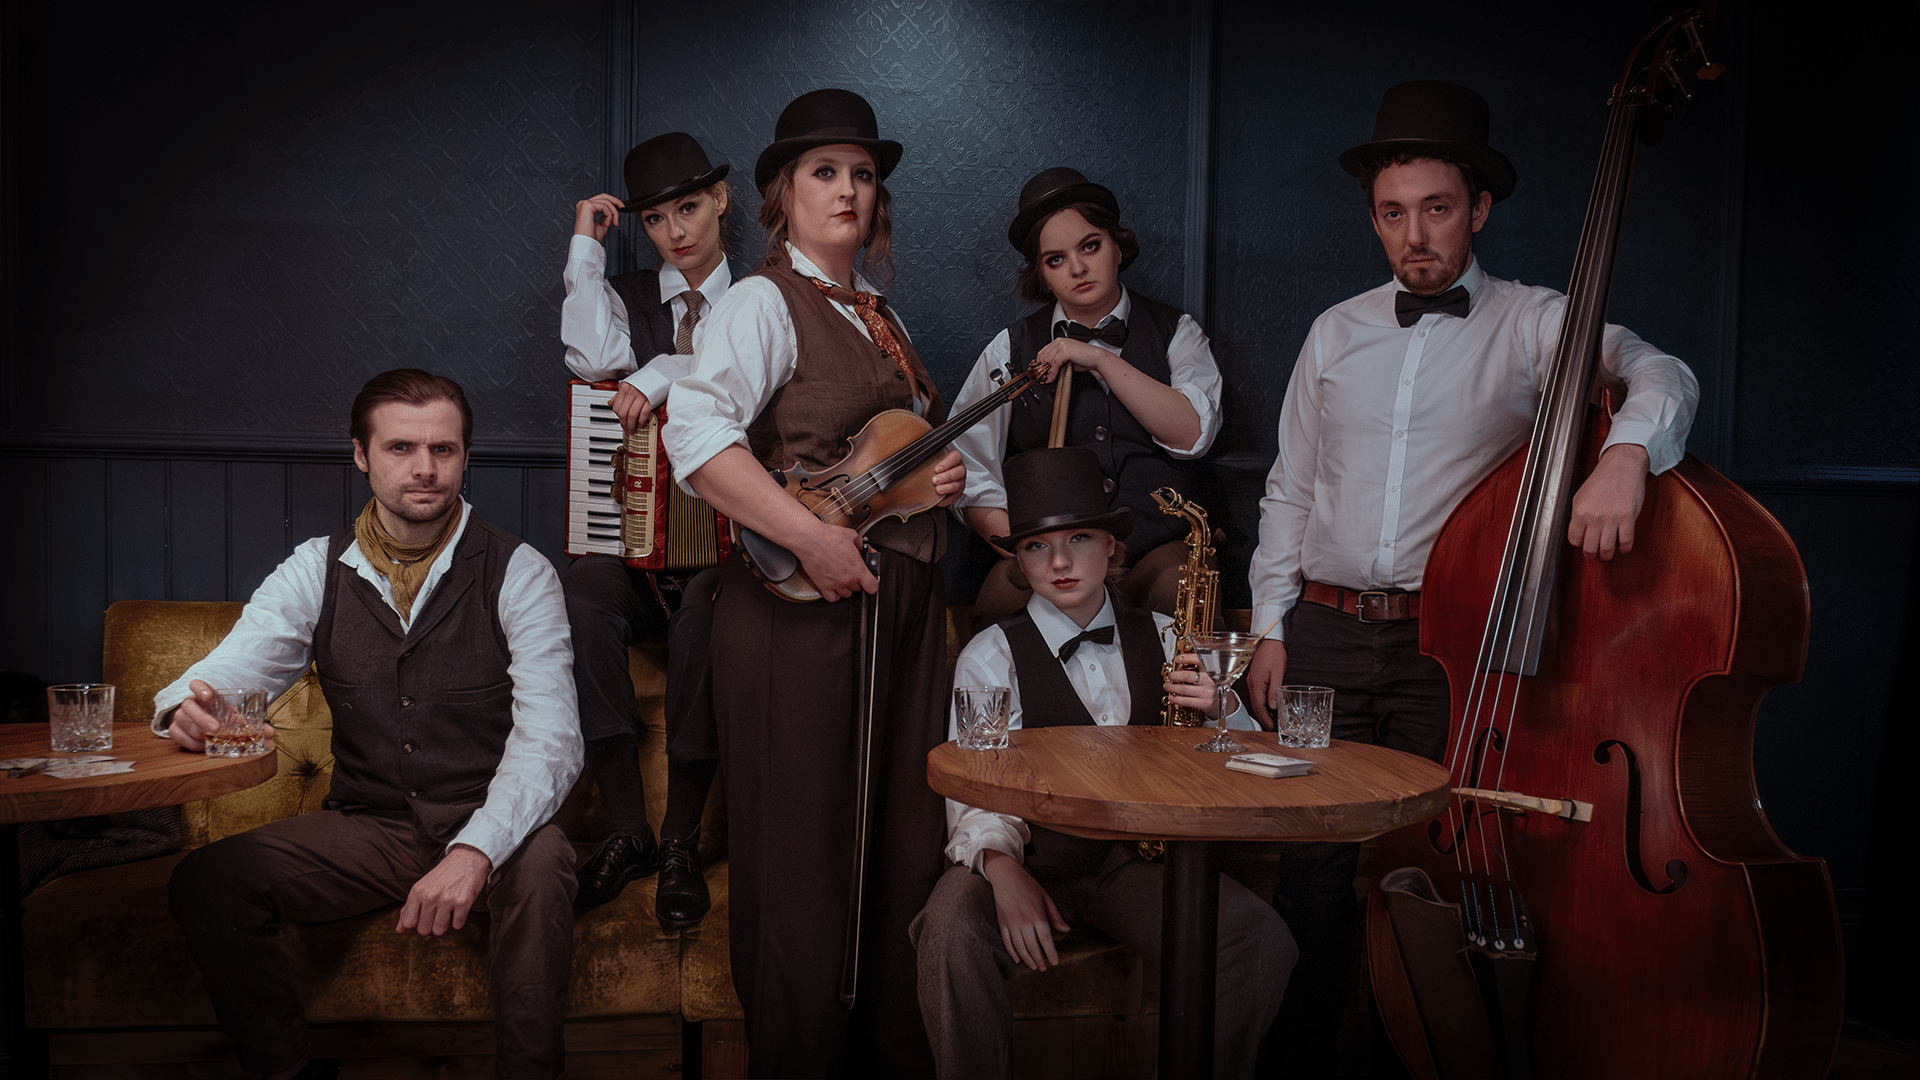 The cast of 40 Elephants as the 1920s' 40 Elephant Gang, looking cool and staring into the camera daringly, holding their instruments. Left to right: arm resting on the table, drinking his glass of whiskey; elbow on her accordeon tipping her hat; holding her violin and bow; holding drumsticks, holding her saxophone, leaning on his contrabass.